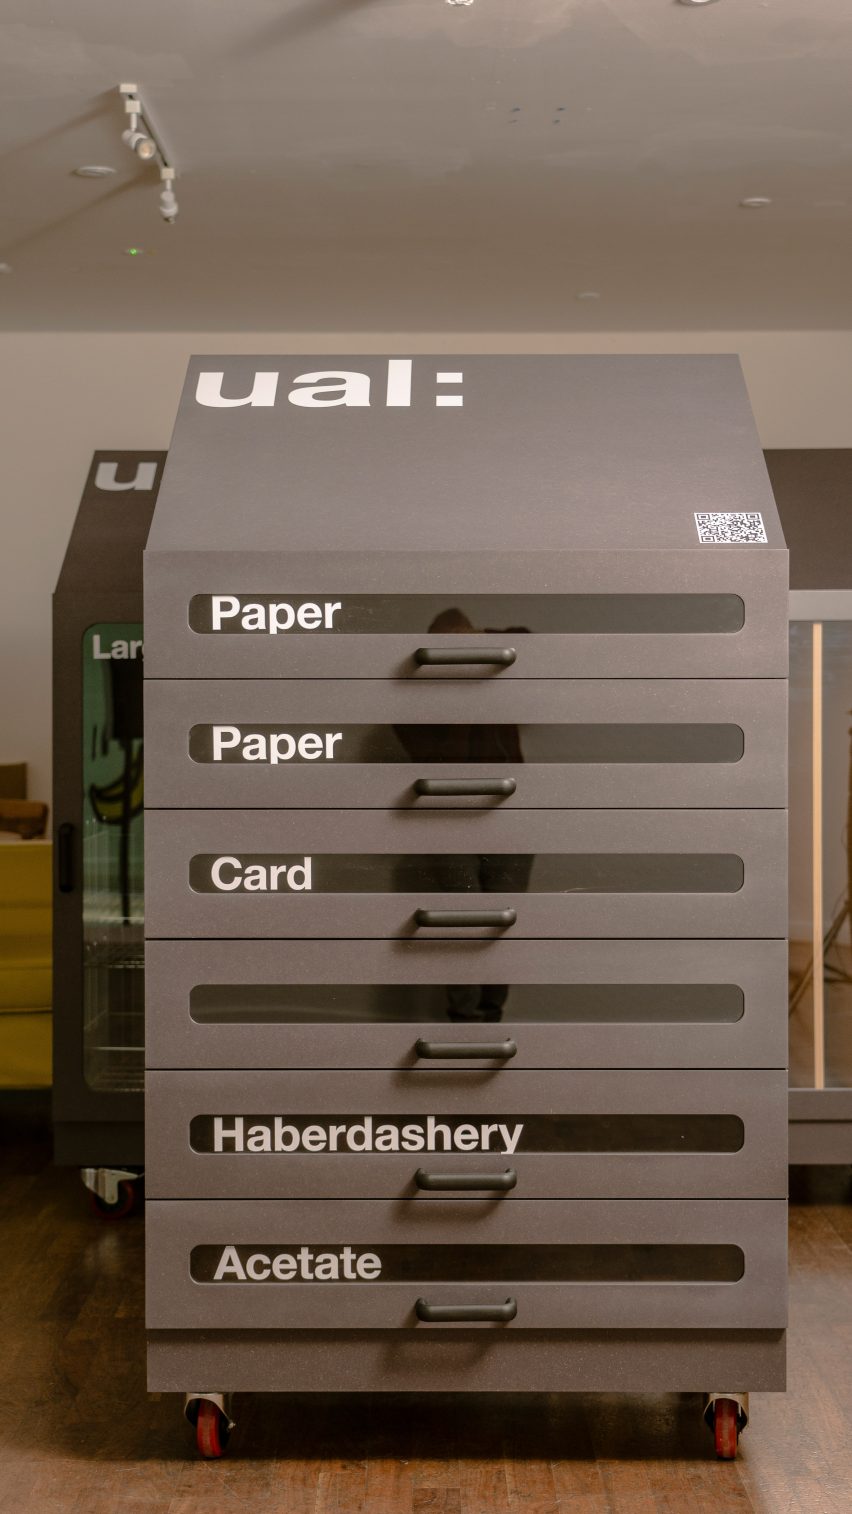 Material donation box for paper, card, haberdashery and acetate at University of the Arts London (UAL)